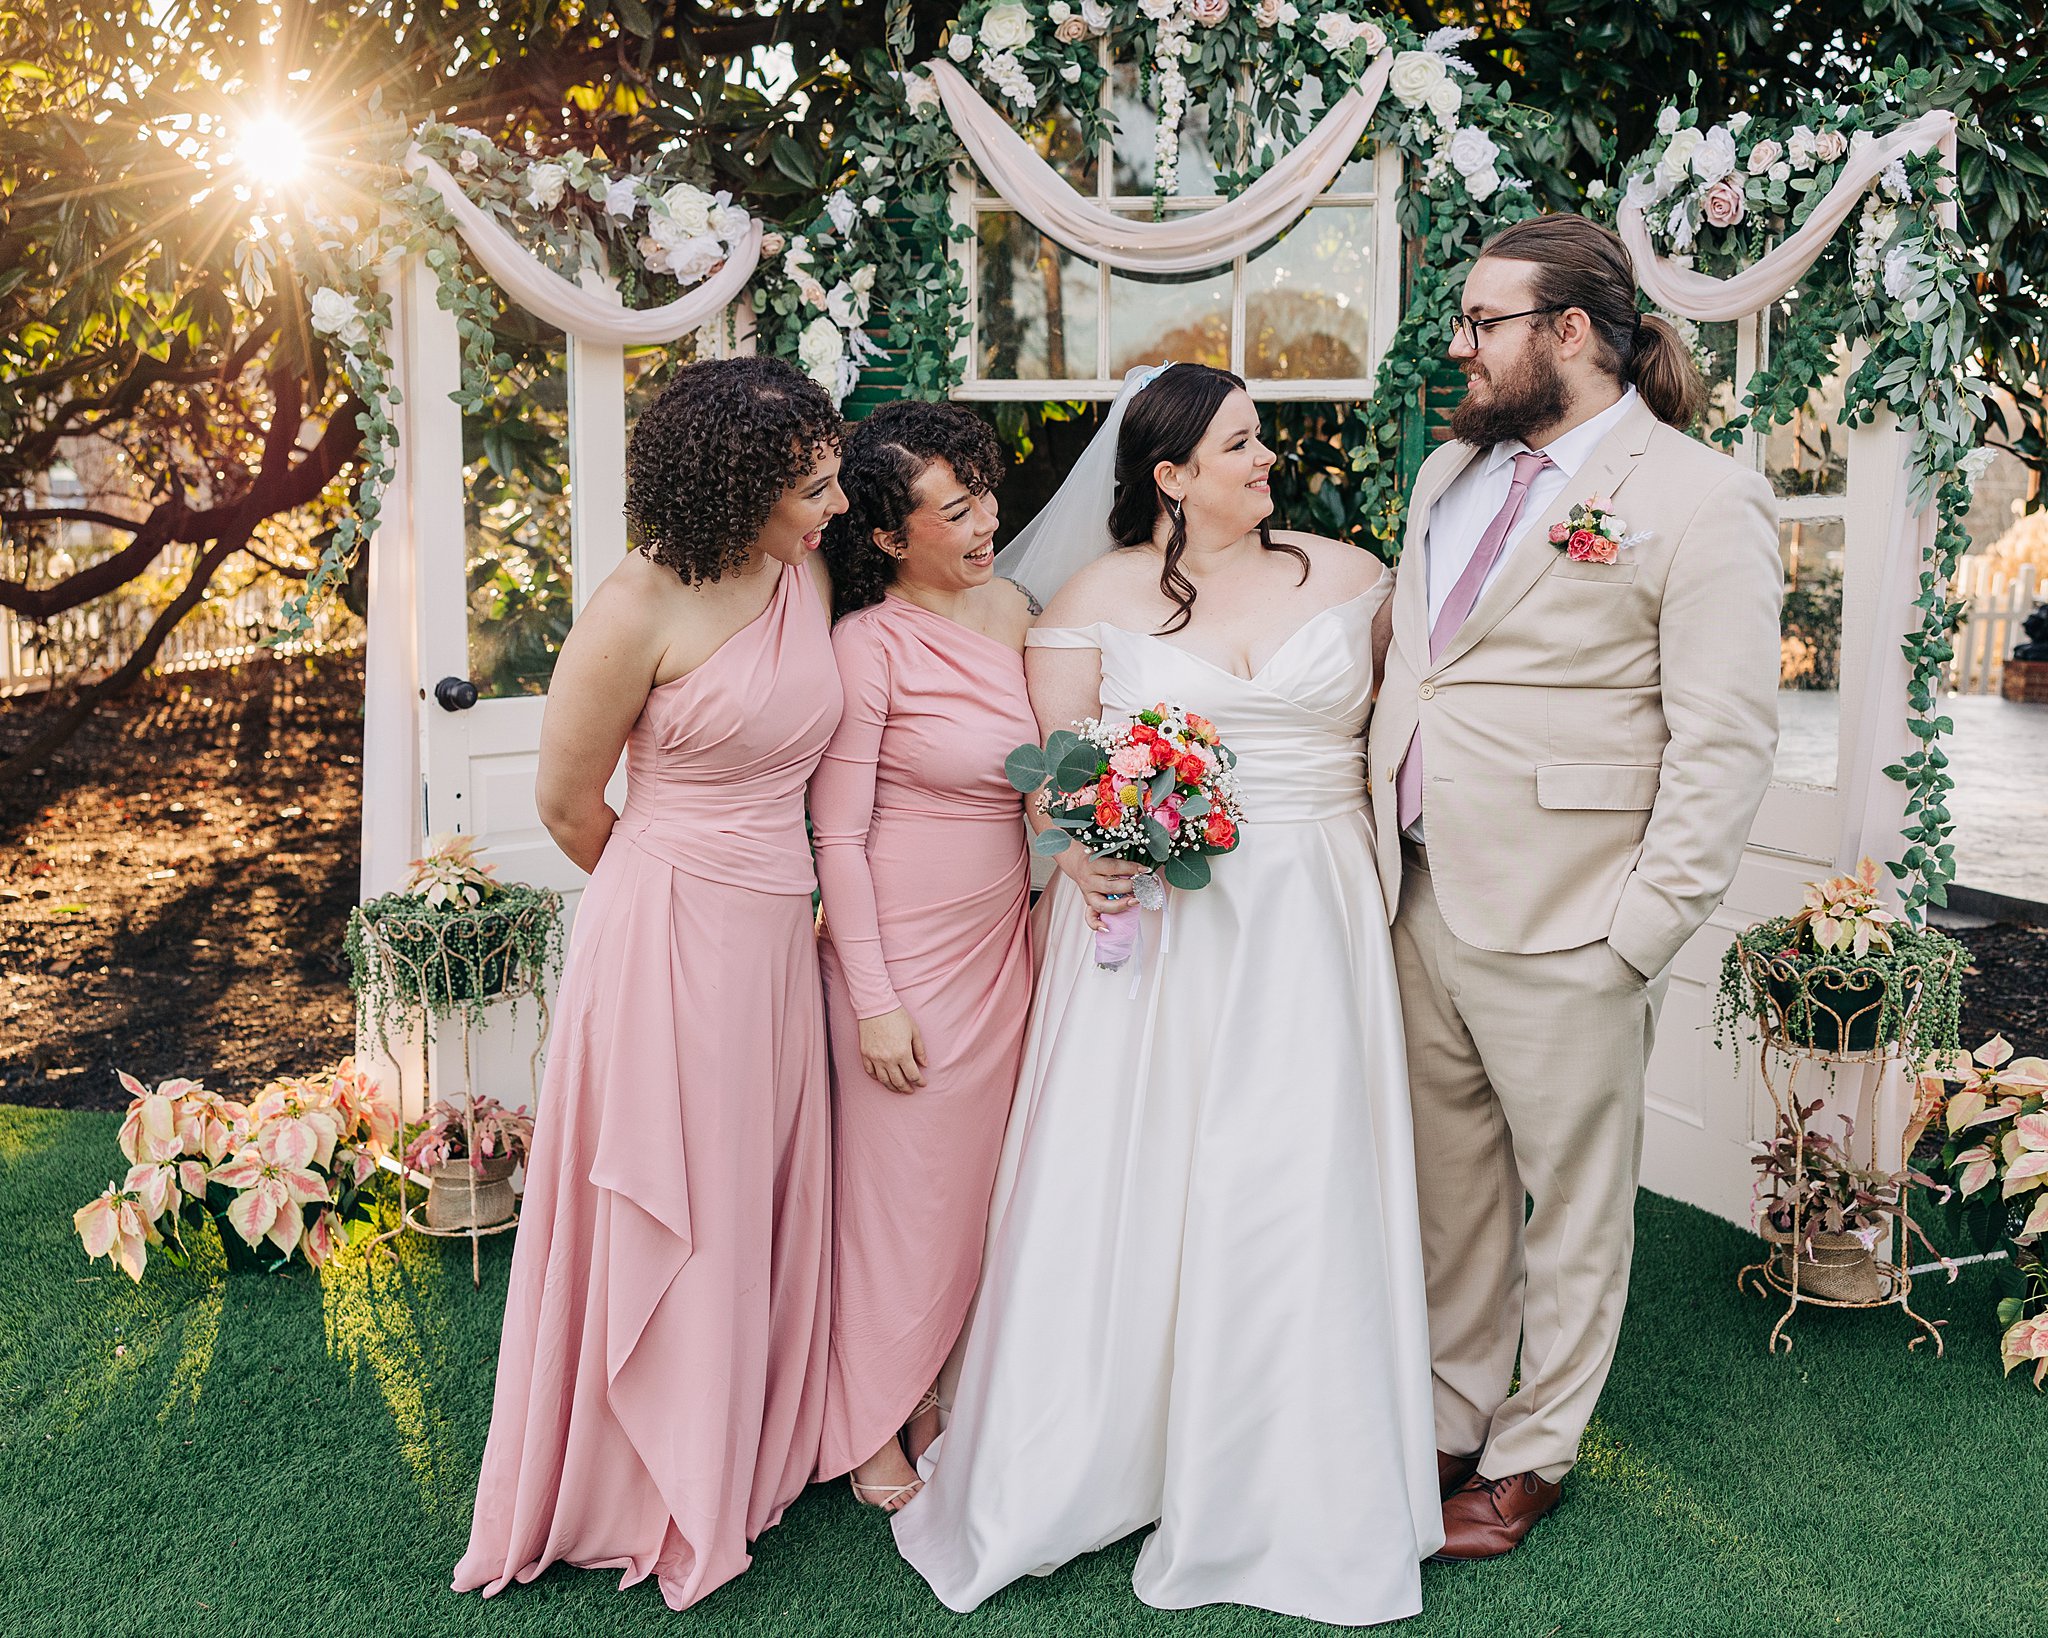 A bride stands in a garden ceremony location with her bridesmaids and brother